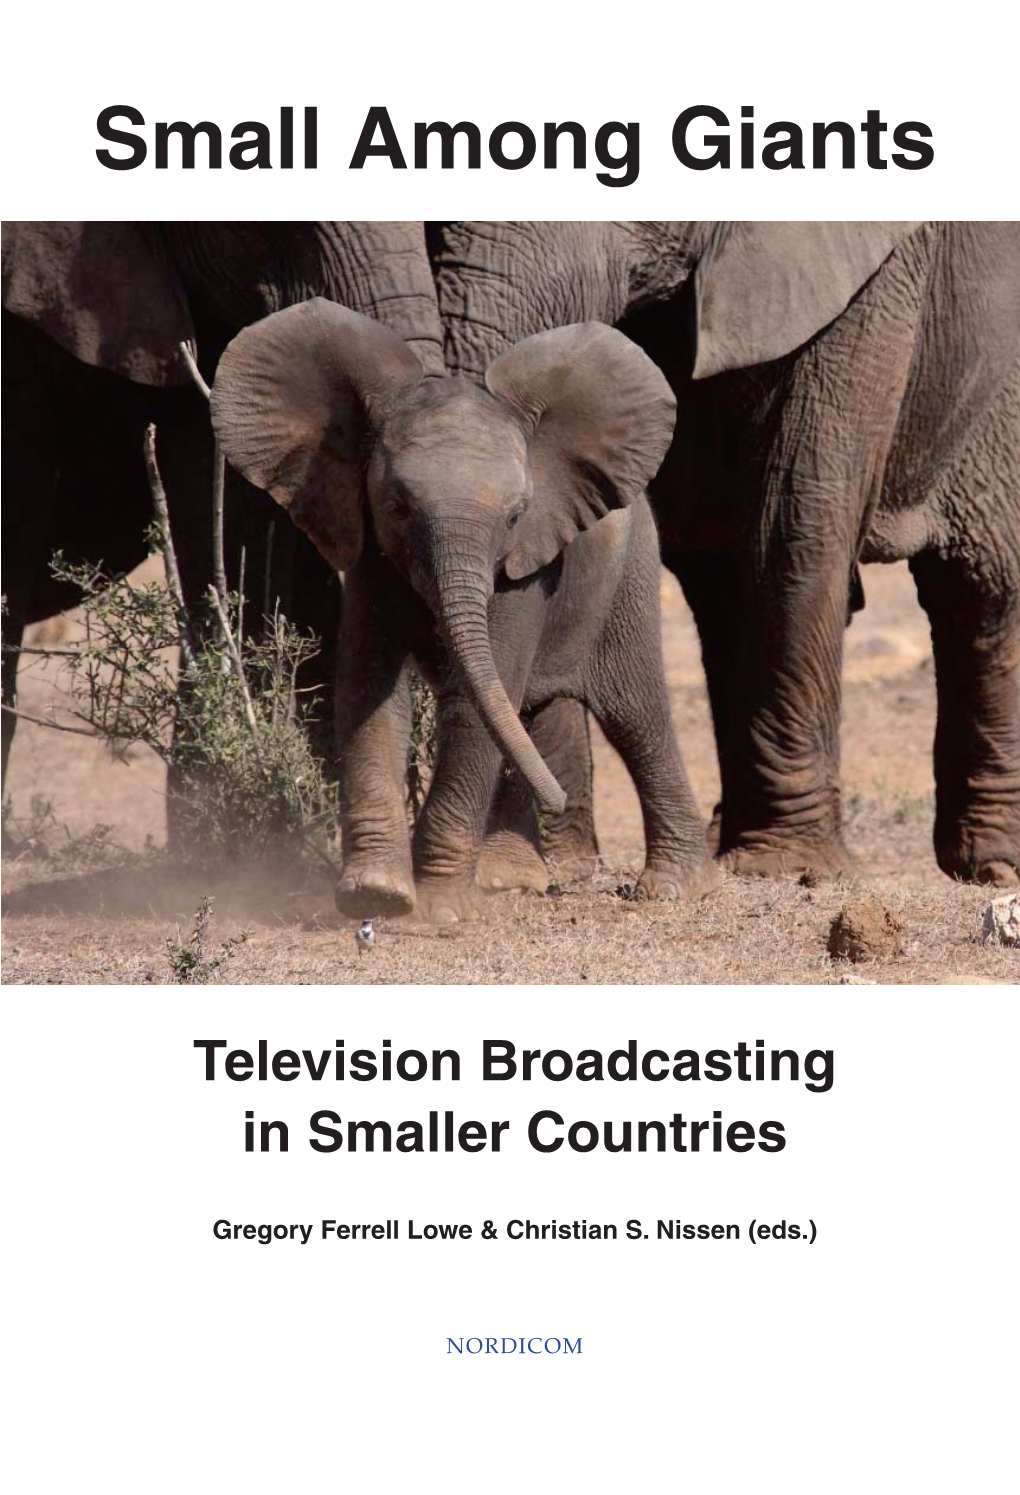 Small Among Giants Television Broadcasting in Smaller Countries